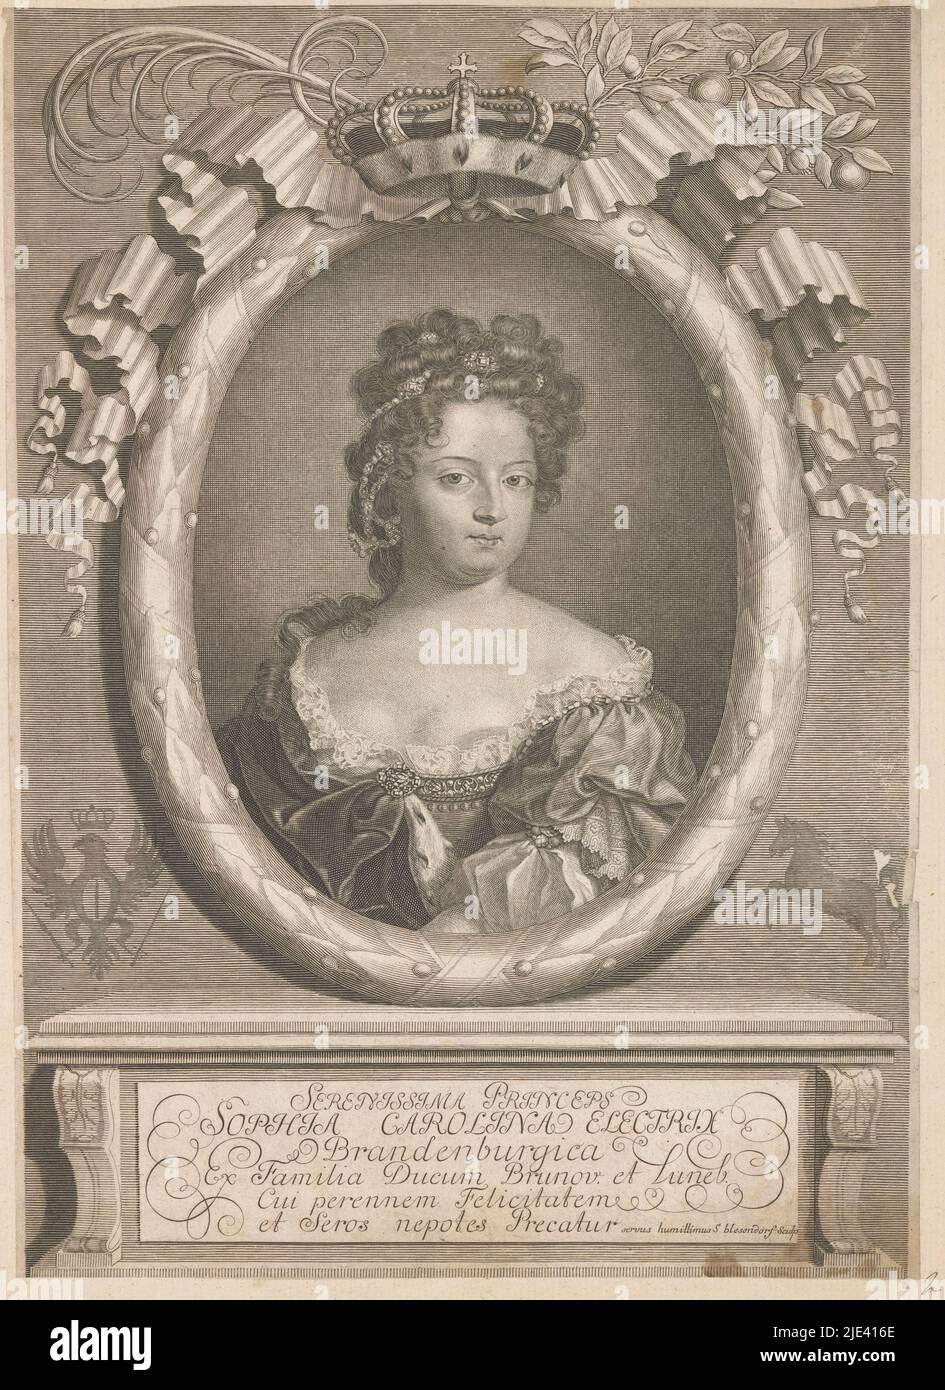 Portrait of Sophia Charlotte, Queen of Prussia, as Electress of Brandenburg, Samuel Blesendorf, 1688 - 1701, print maker: Samuel Blesendorf, (mentioned on object), Berlin, 1688 - 1701, paper, engraving, h 330 mm × w 235 mm Stock Photo